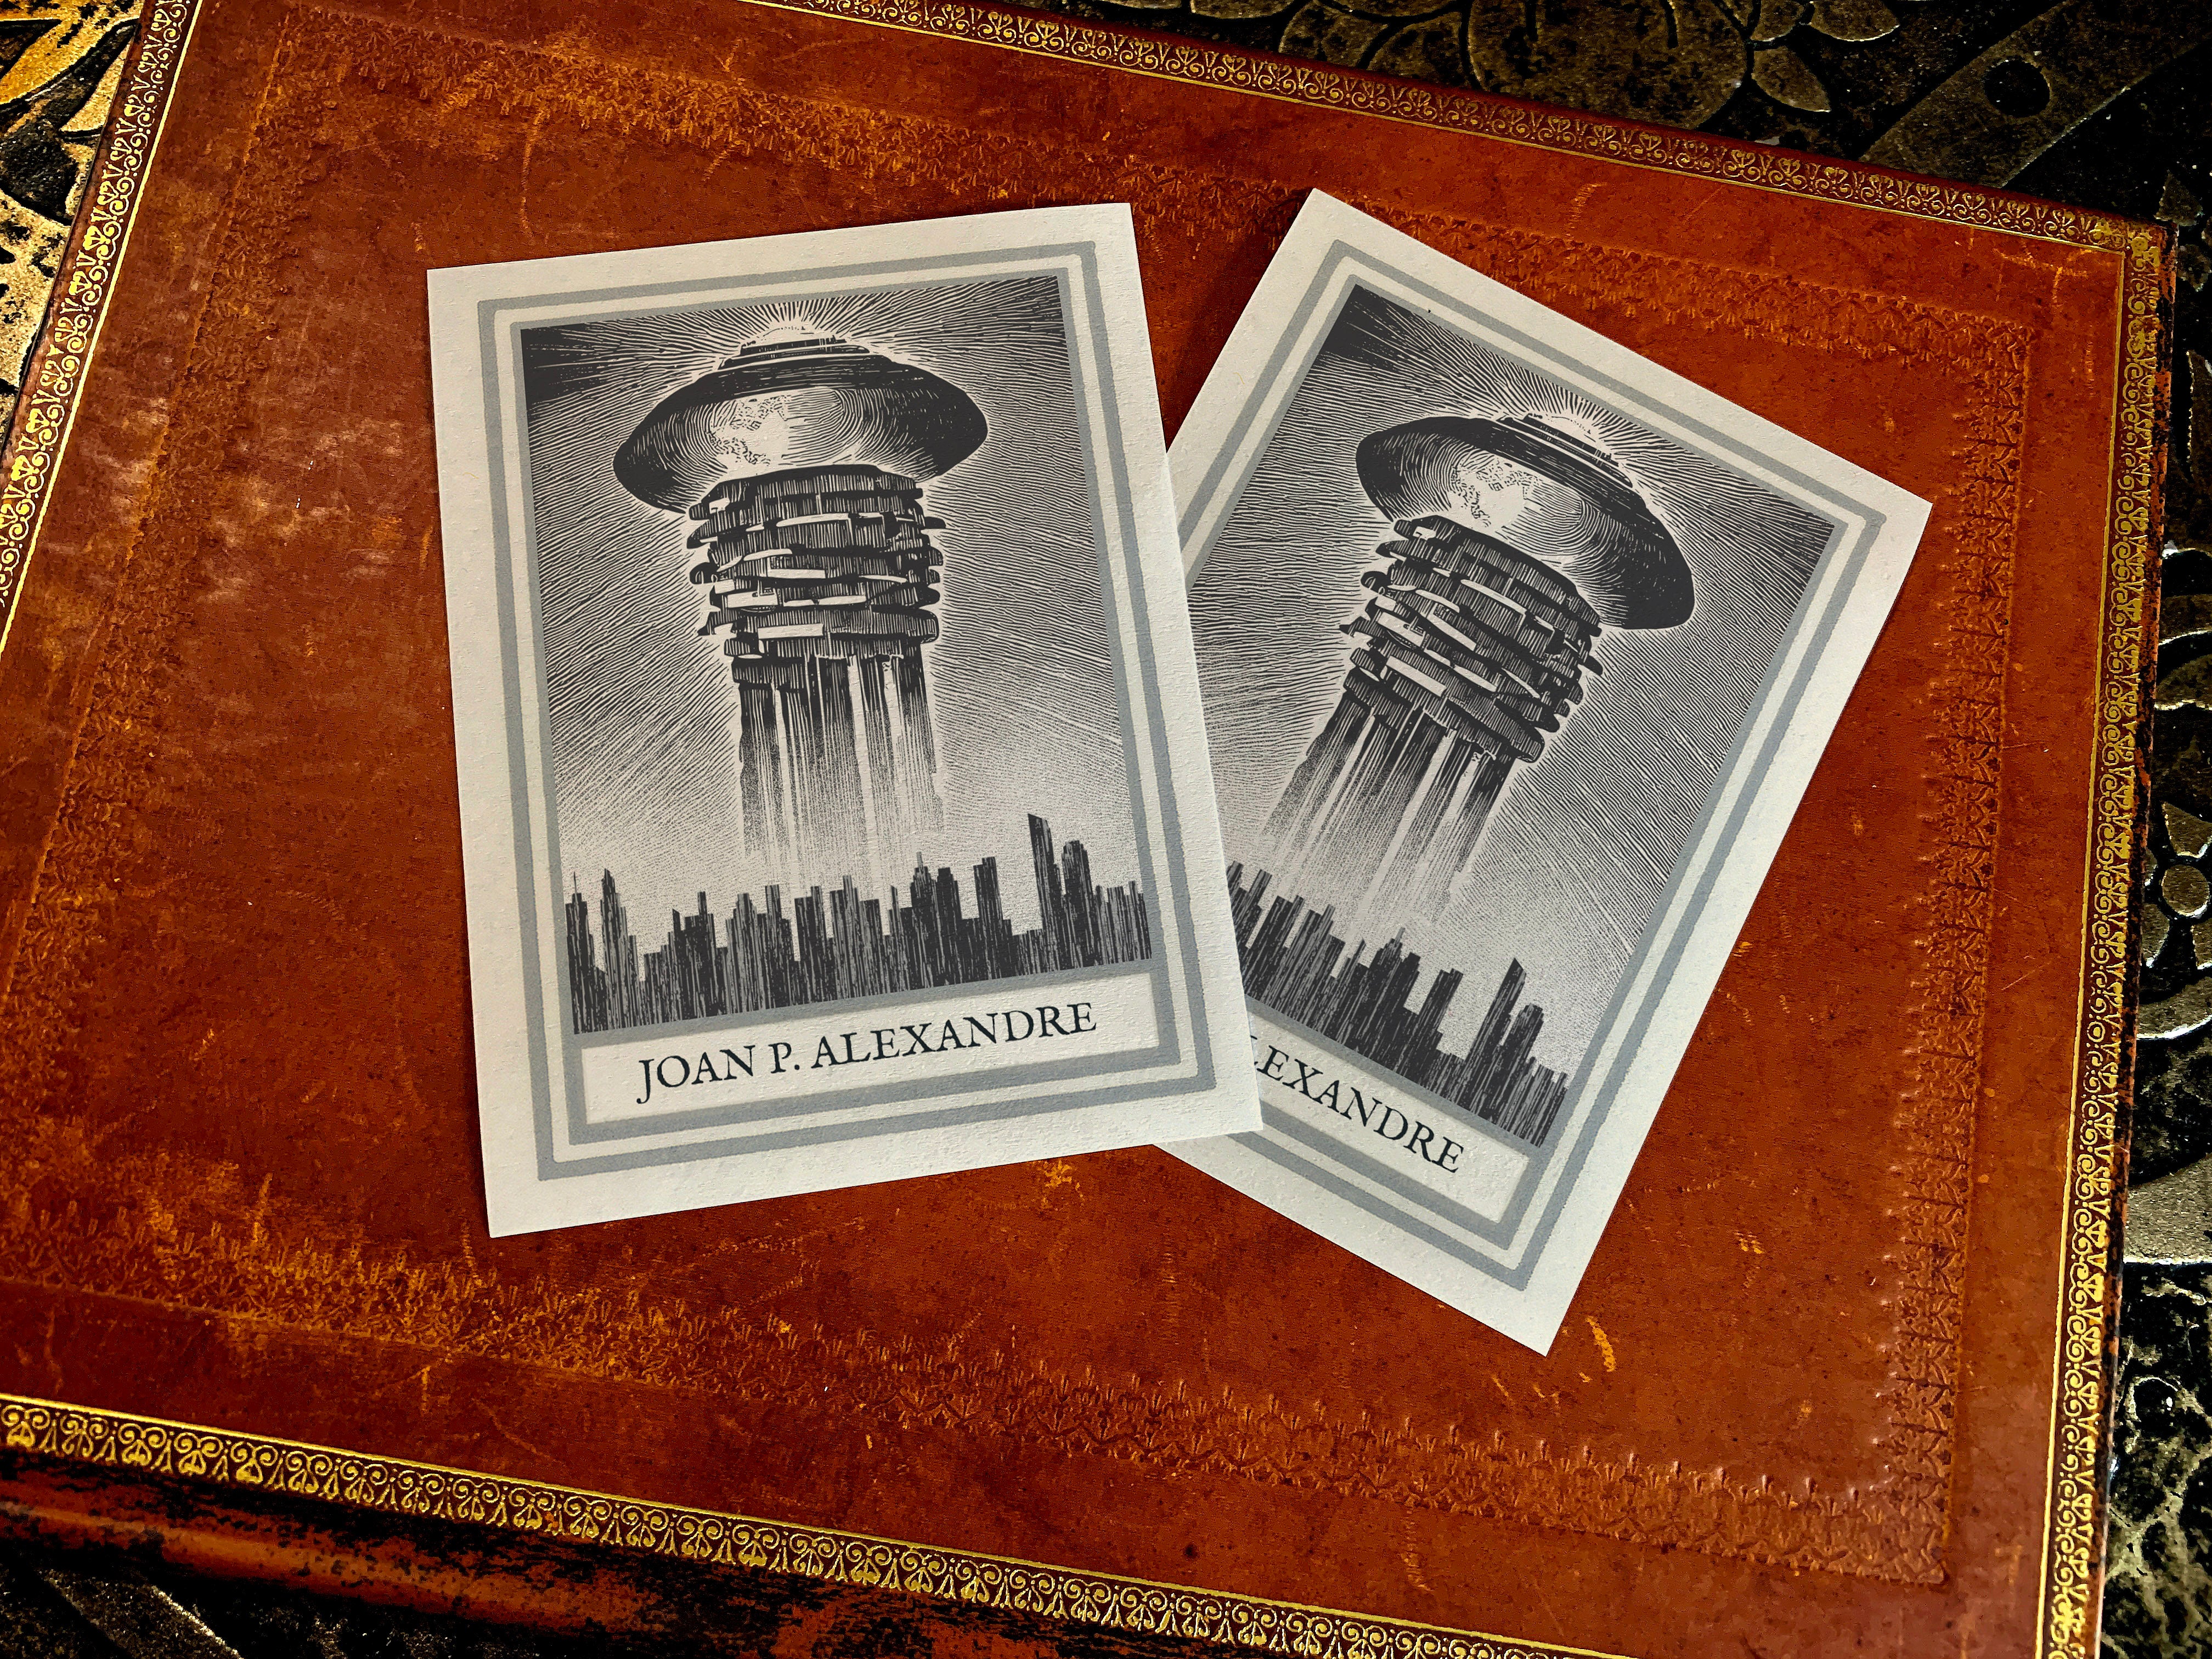 Knowledge Mothership, UFO Sci-fi Personalized Ex-Libris Bookplates, Crafted on Traditional Gummed Paper, 3in x 4in, Set of 30